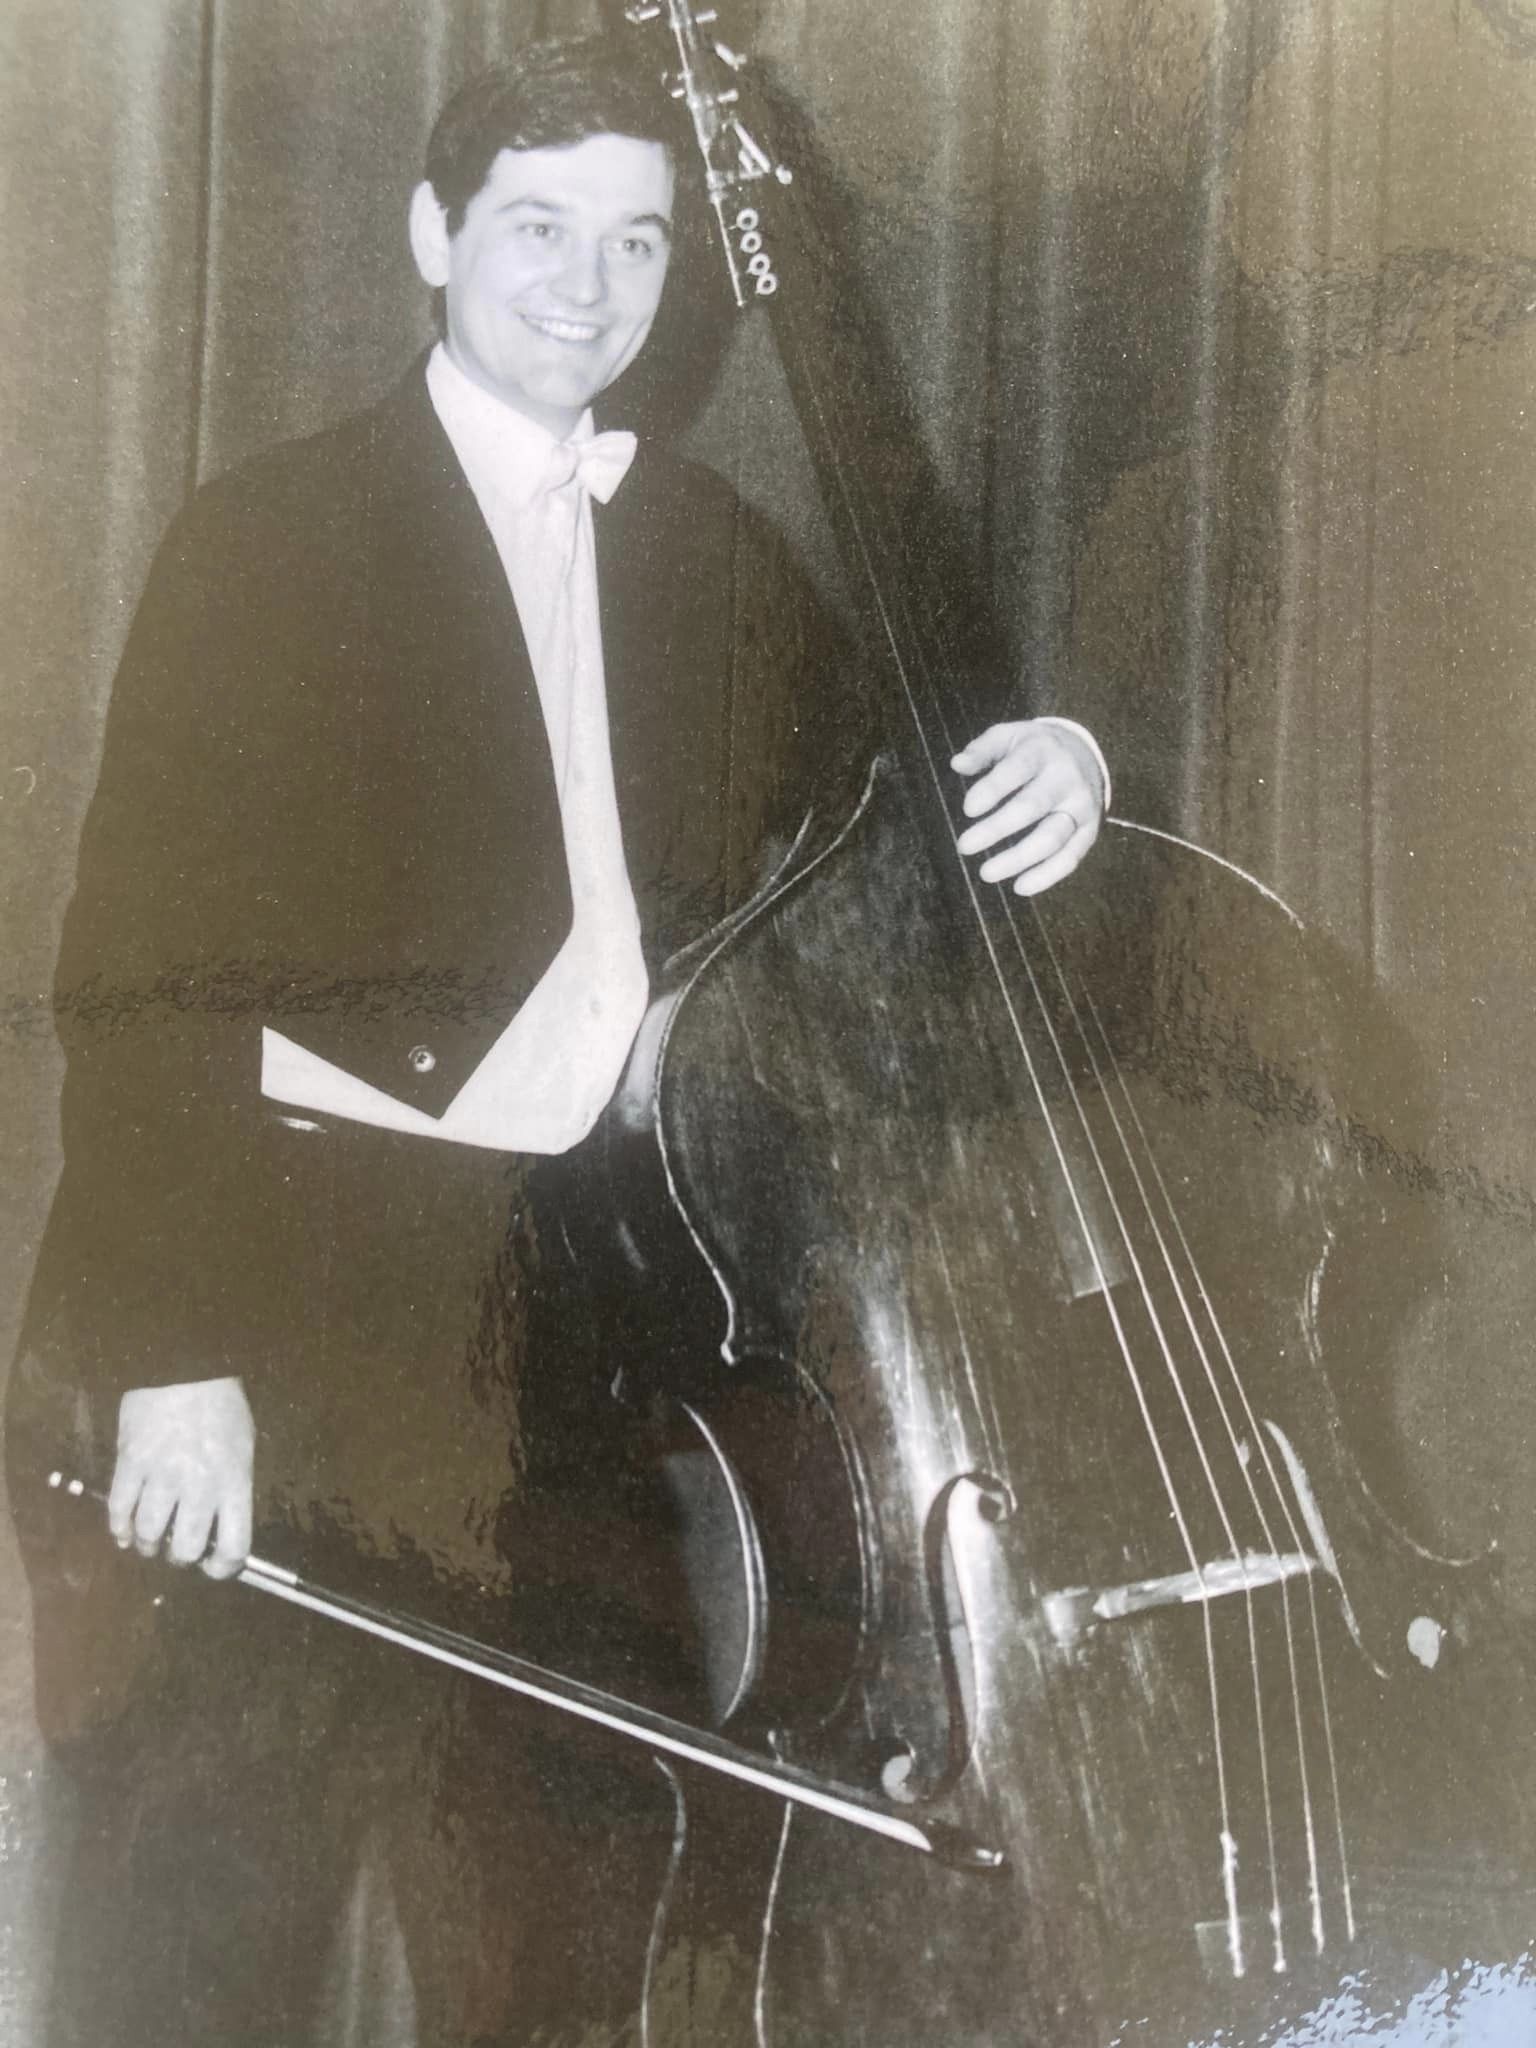 Death of leading London double-bass, 76